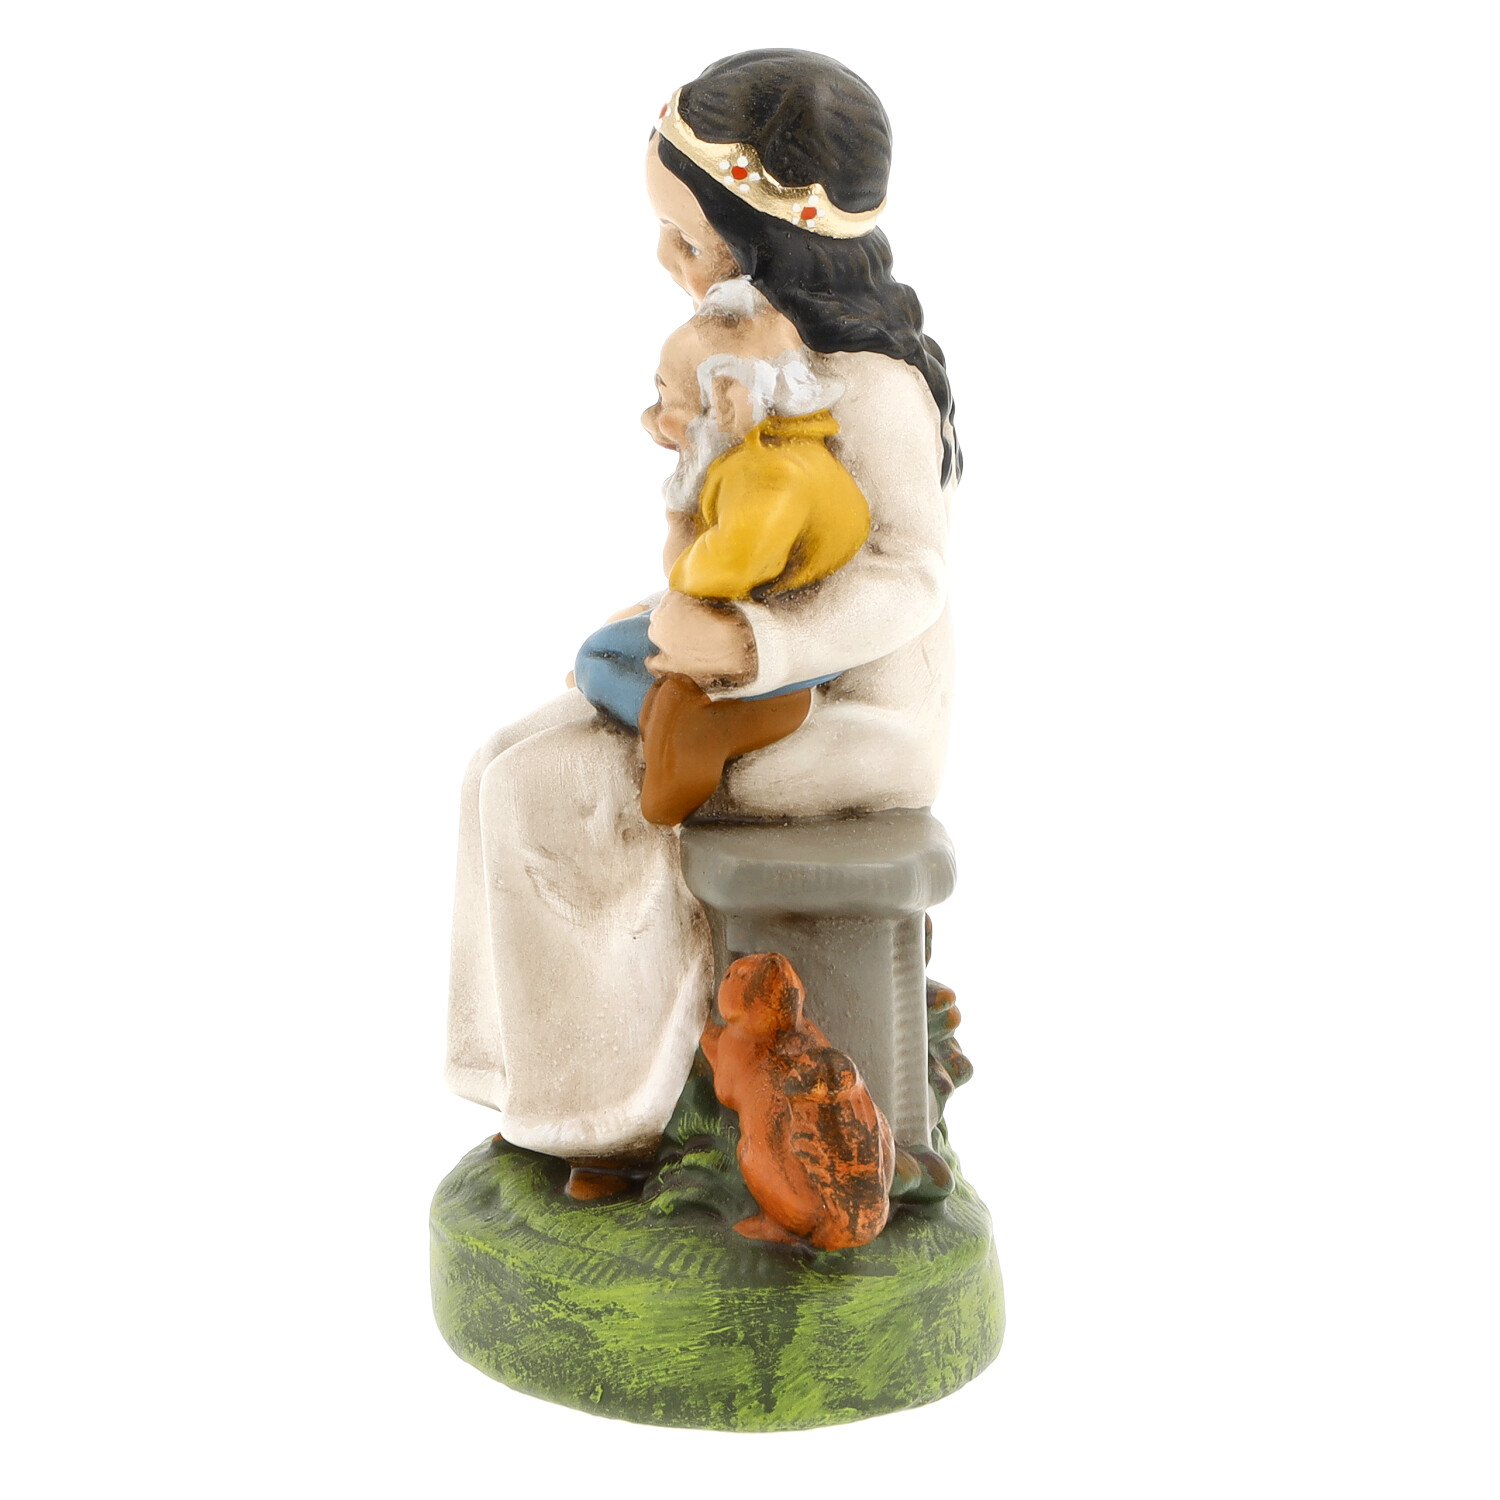 Snow White with dwarfs - Marolin Papermaché figure - Brothers Grimm - made in Germany